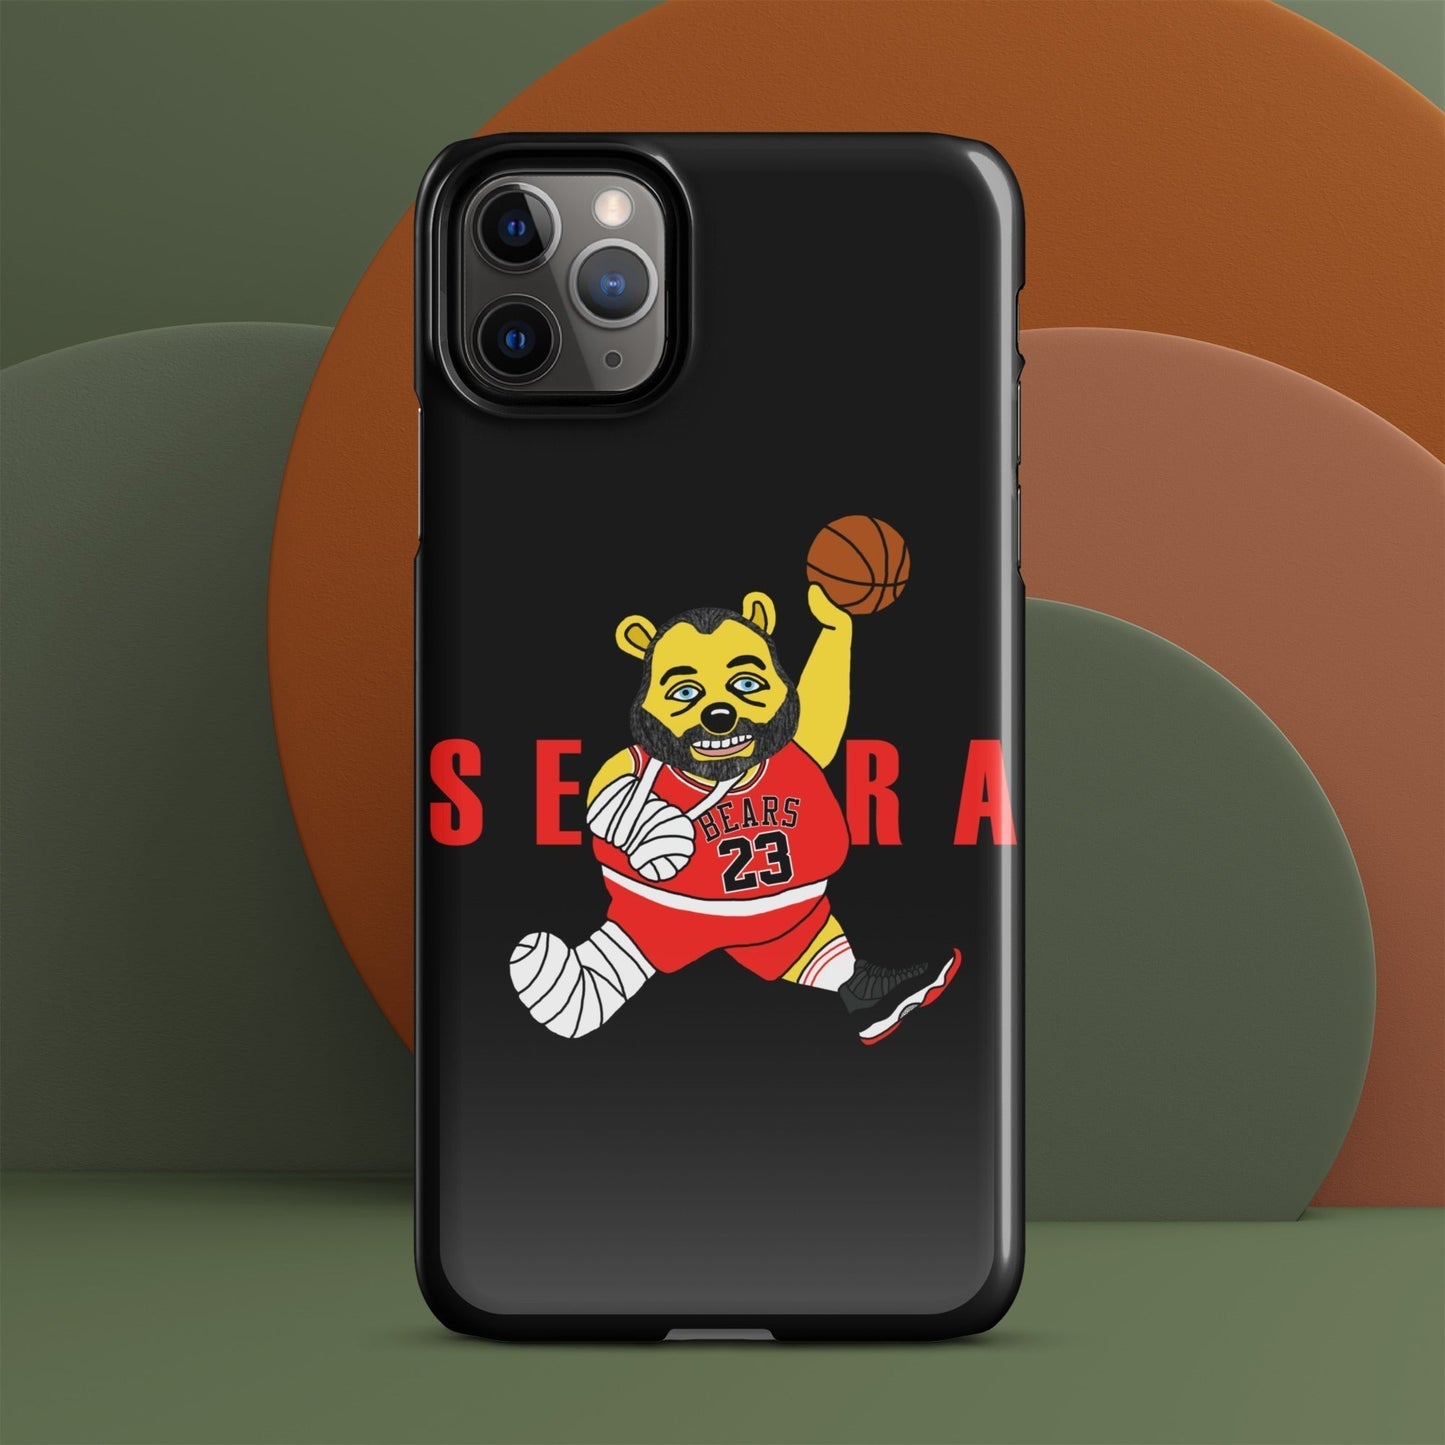 Air Segura, Tom Segura Basketball, Your Mom's House (YMH), 2 Bears 1 Cave, Funny Snap case for iPhone Next Cult Brand 2 Bears 1 Cave, Air Segura, Podcasts, Stand-up Comedy, Tom Segura, YMH